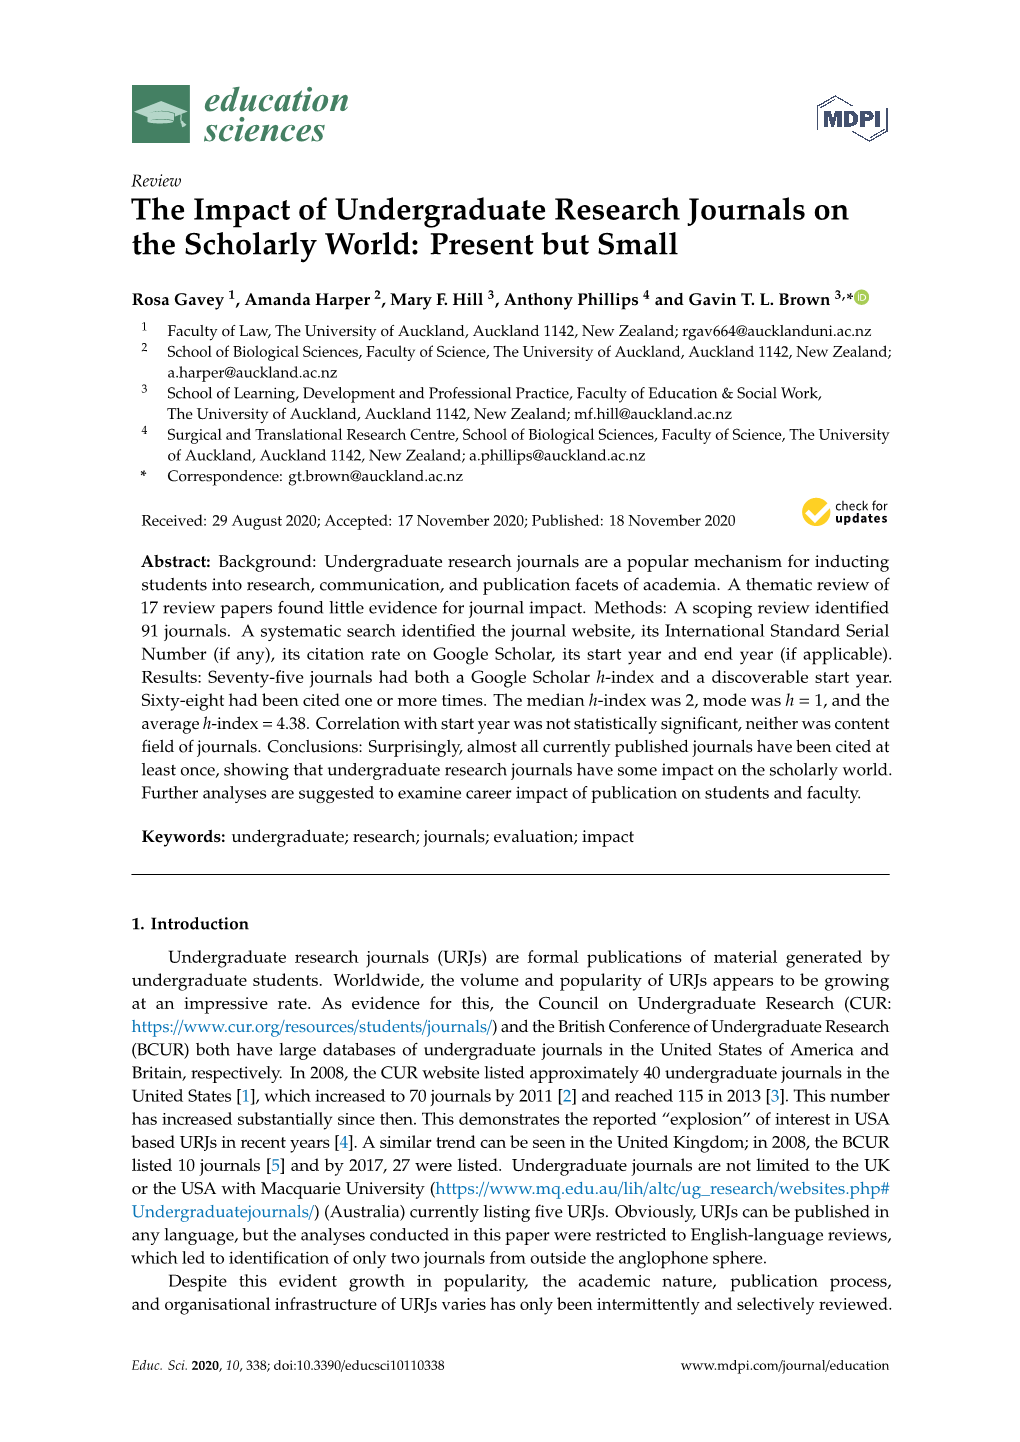 The Impact of Undergraduate Research Journals on the Scholarly World: Present but Small